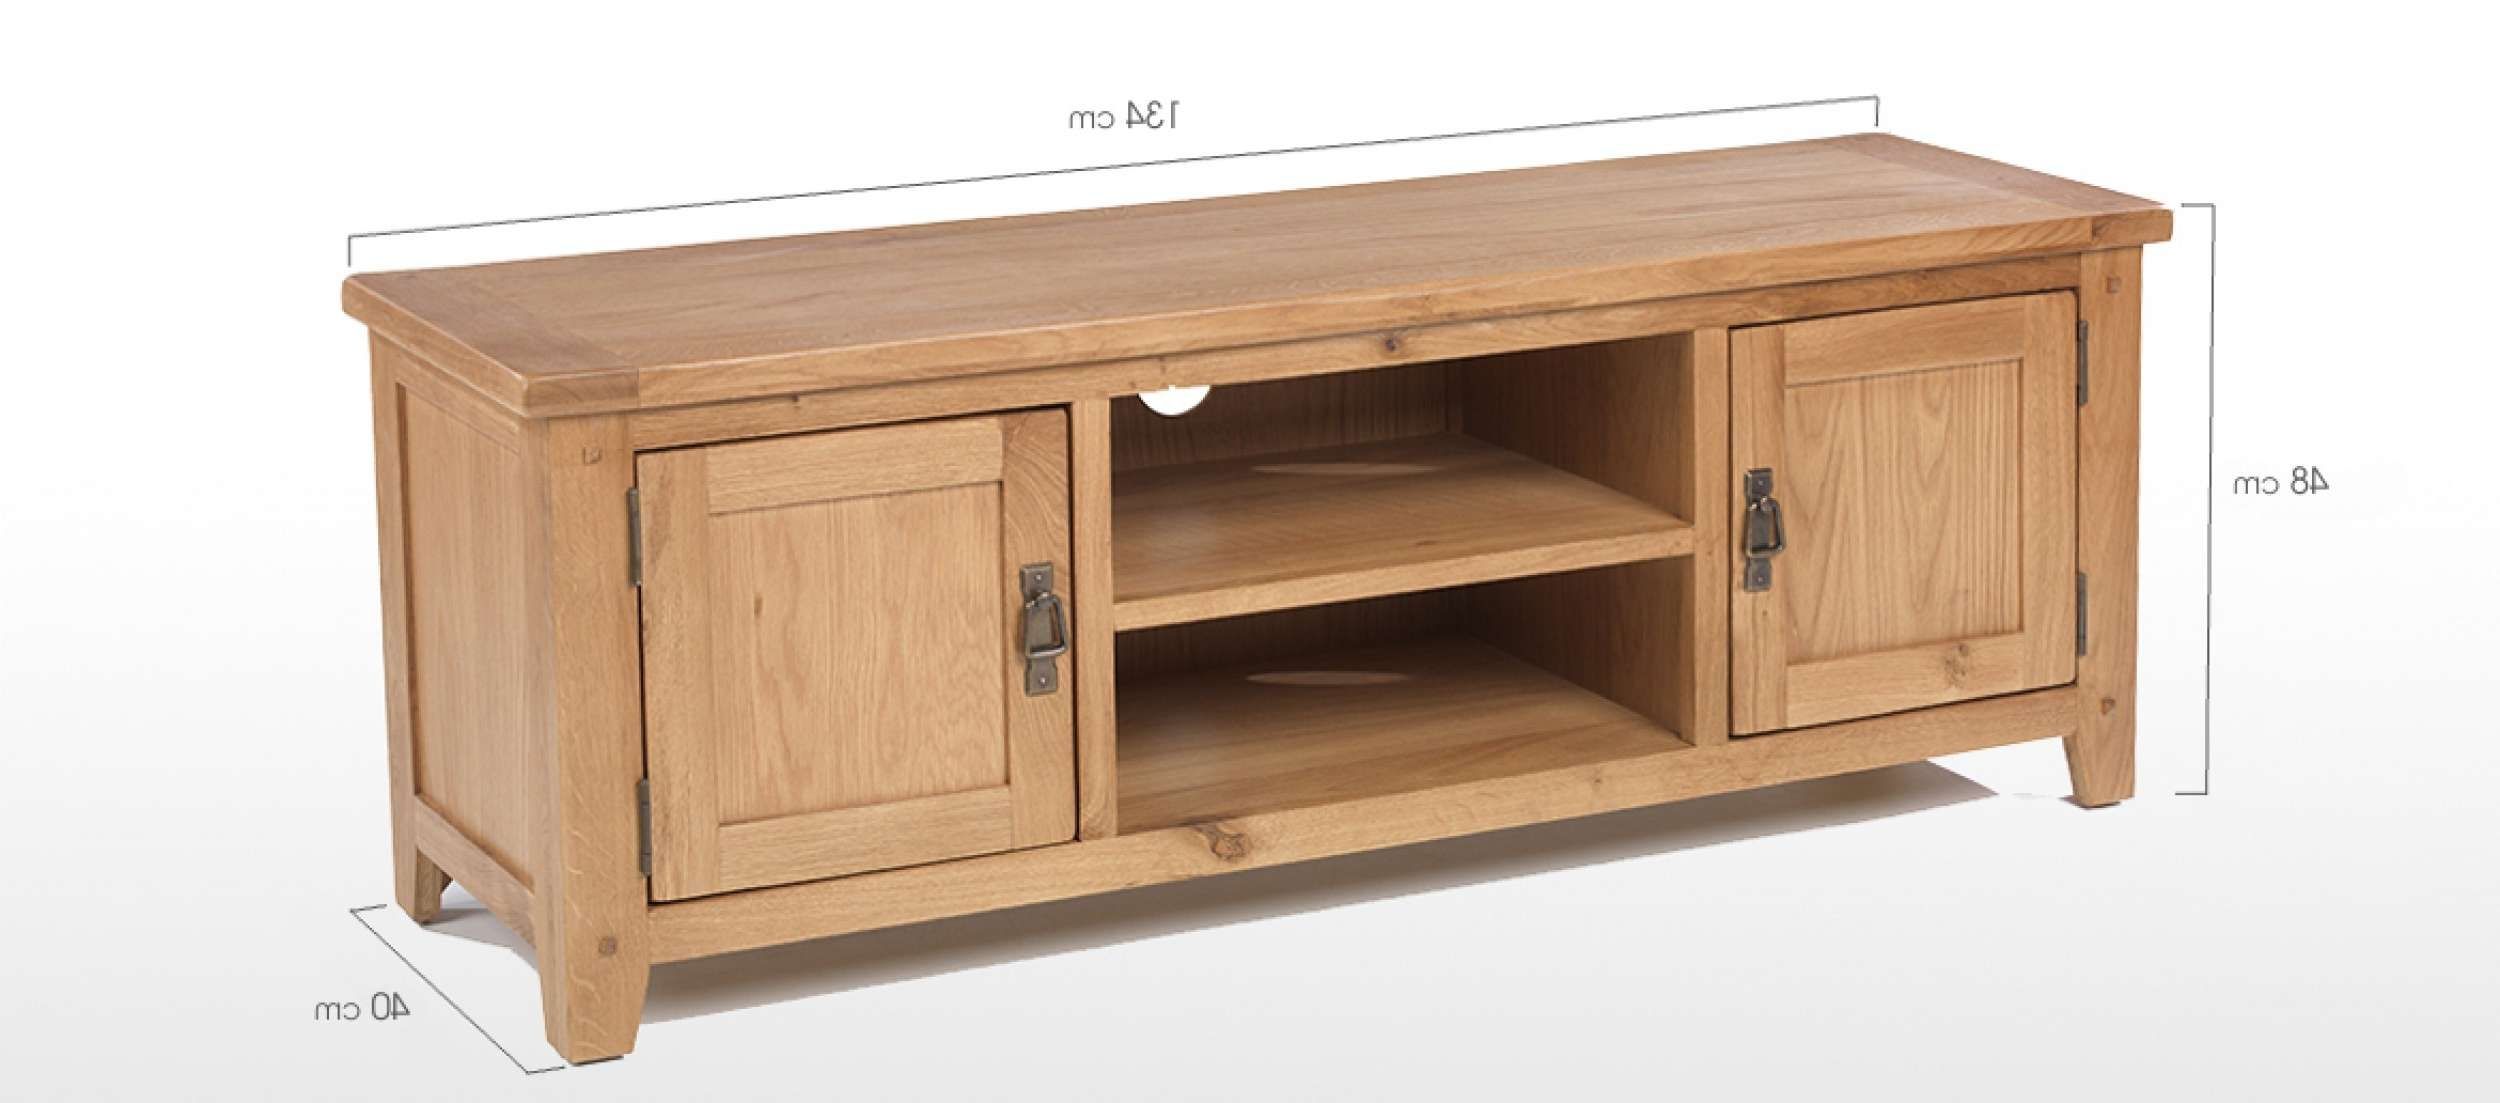 Rustic Oak Plasma Tv Stand | Quercus Living Throughout Rustic Oak Tv Stands (View 1 of 15)